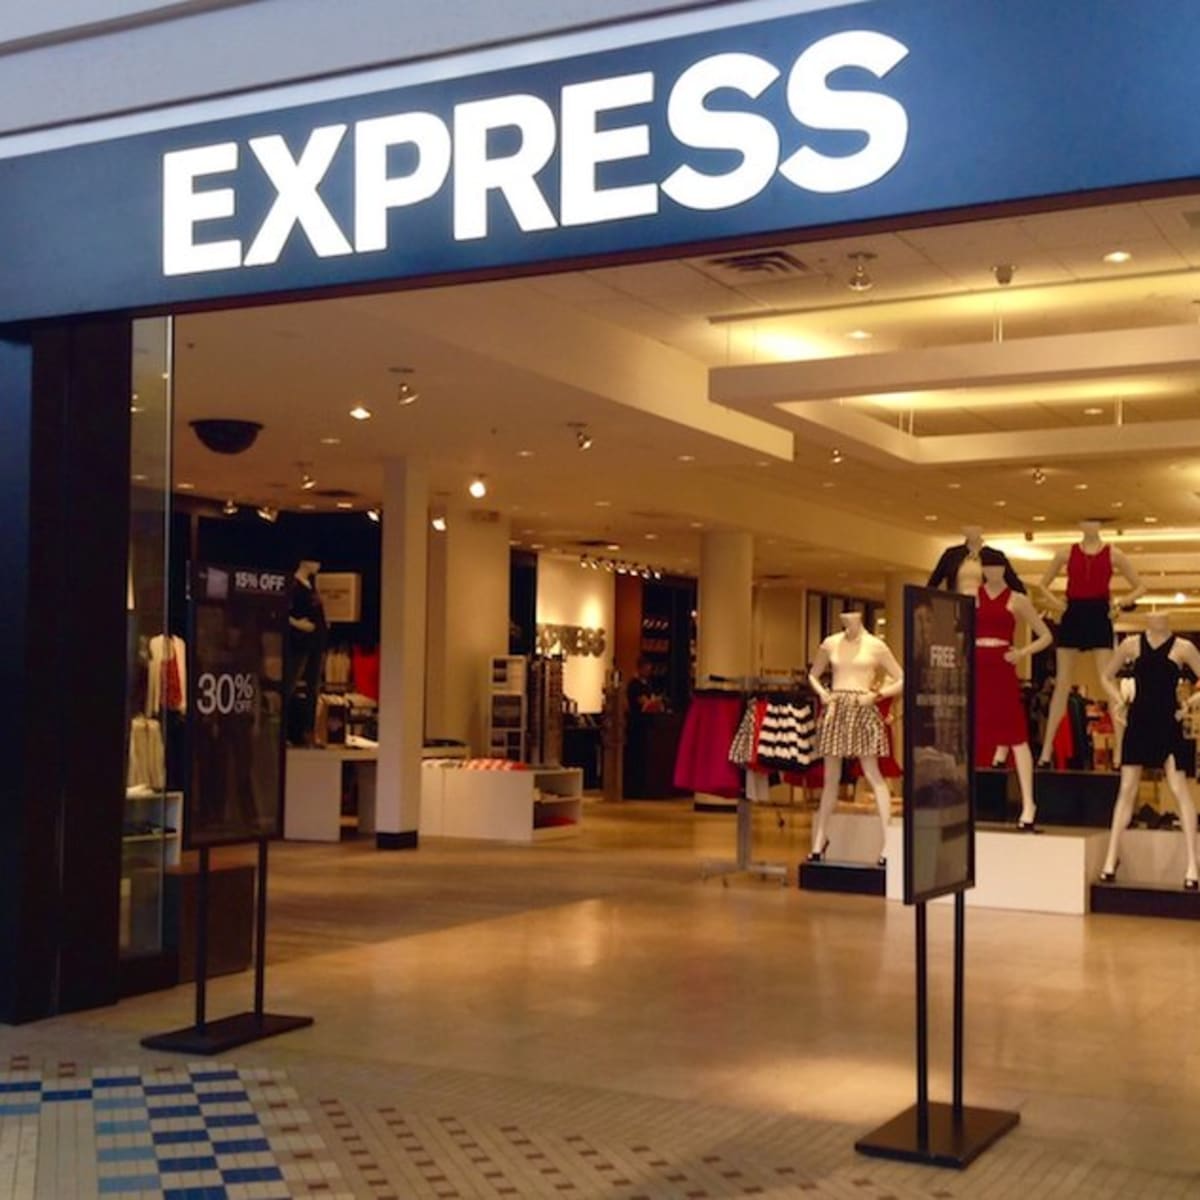 Express Avenue Mall - Hidesign brings you END OF SEASON SALE at up